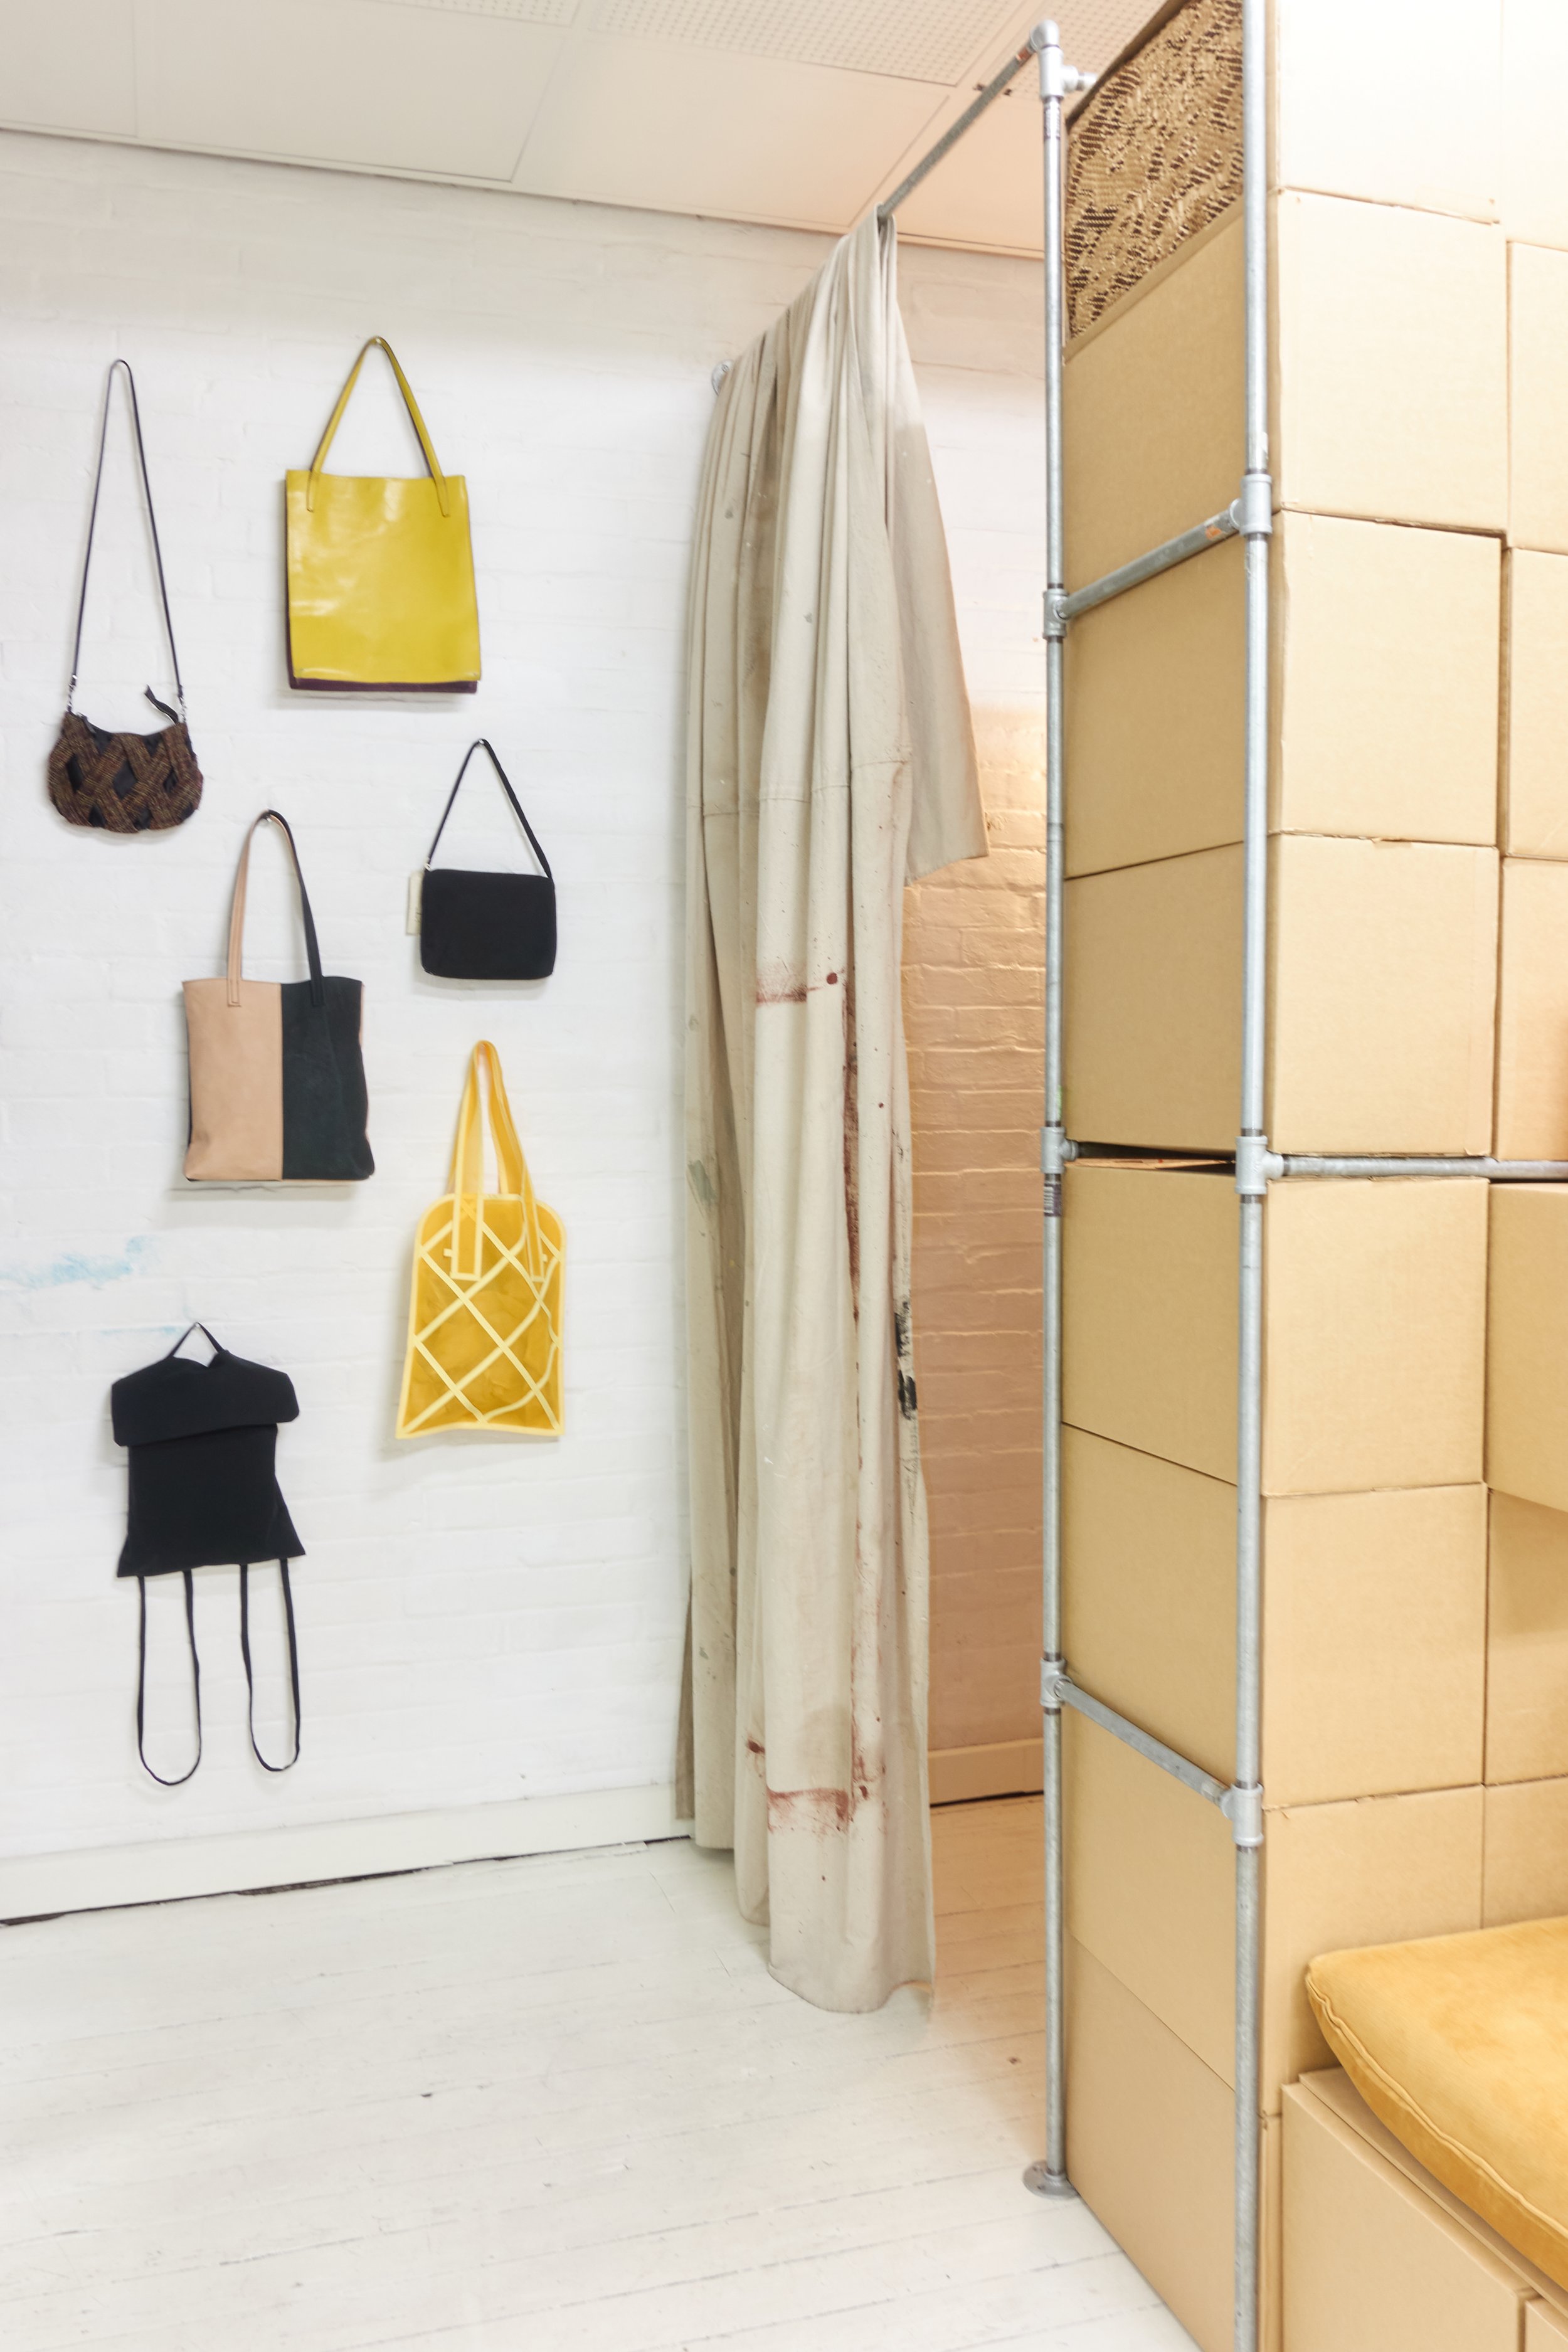 bags at a flat shop - group exhibition 318.jpg